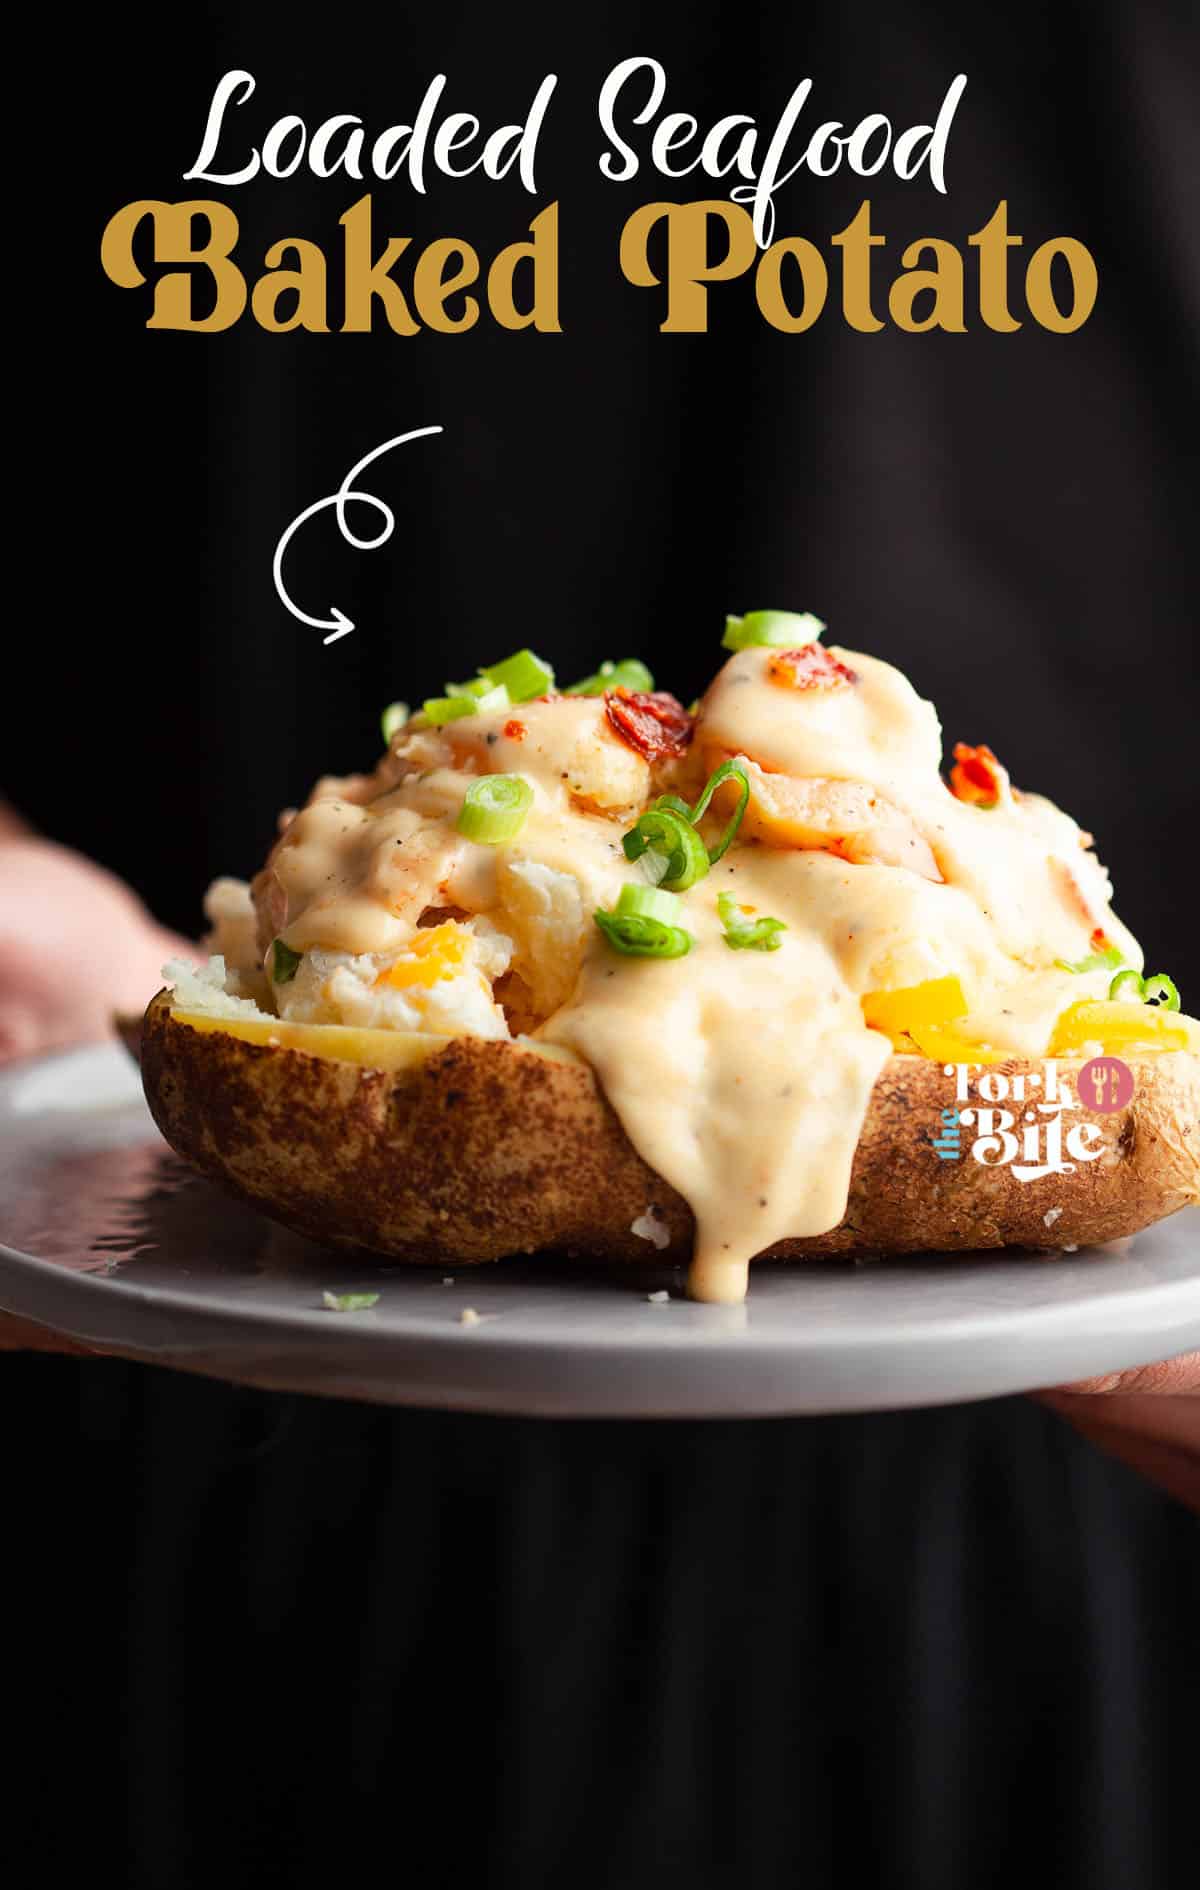 The loaded seafood baked potato dish is a hearty and satisfying meal that brings together the creamy texture of baked potatoes and the flavors of juicy seafood and melted cheese.